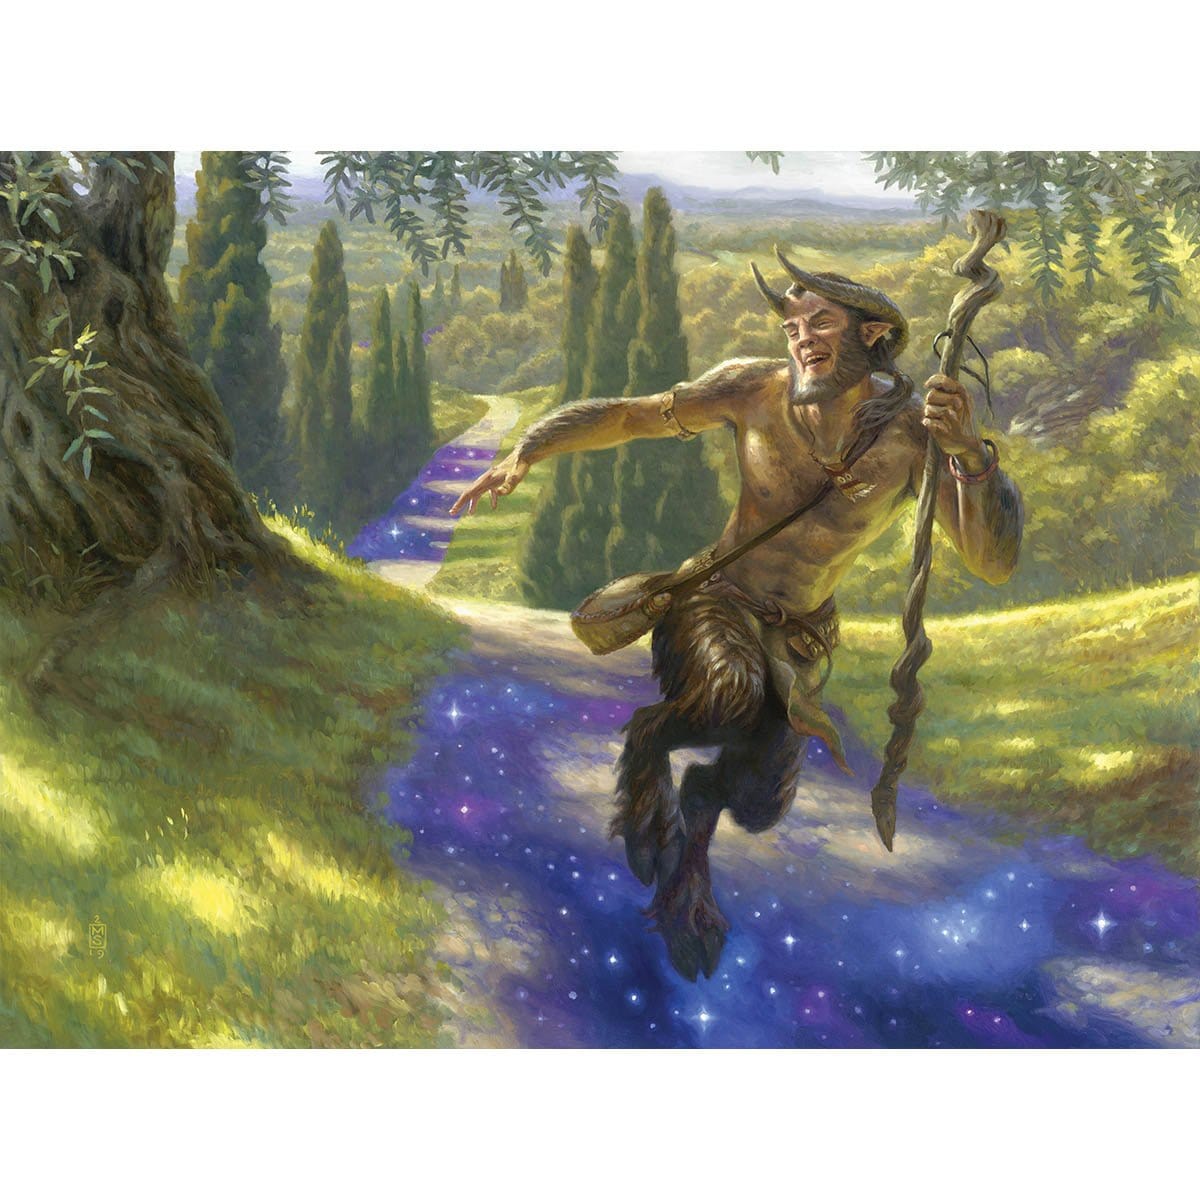 Nessian Wanderer Print - Print - Original Magic Art - Accessories for Magic the Gathering and other card games